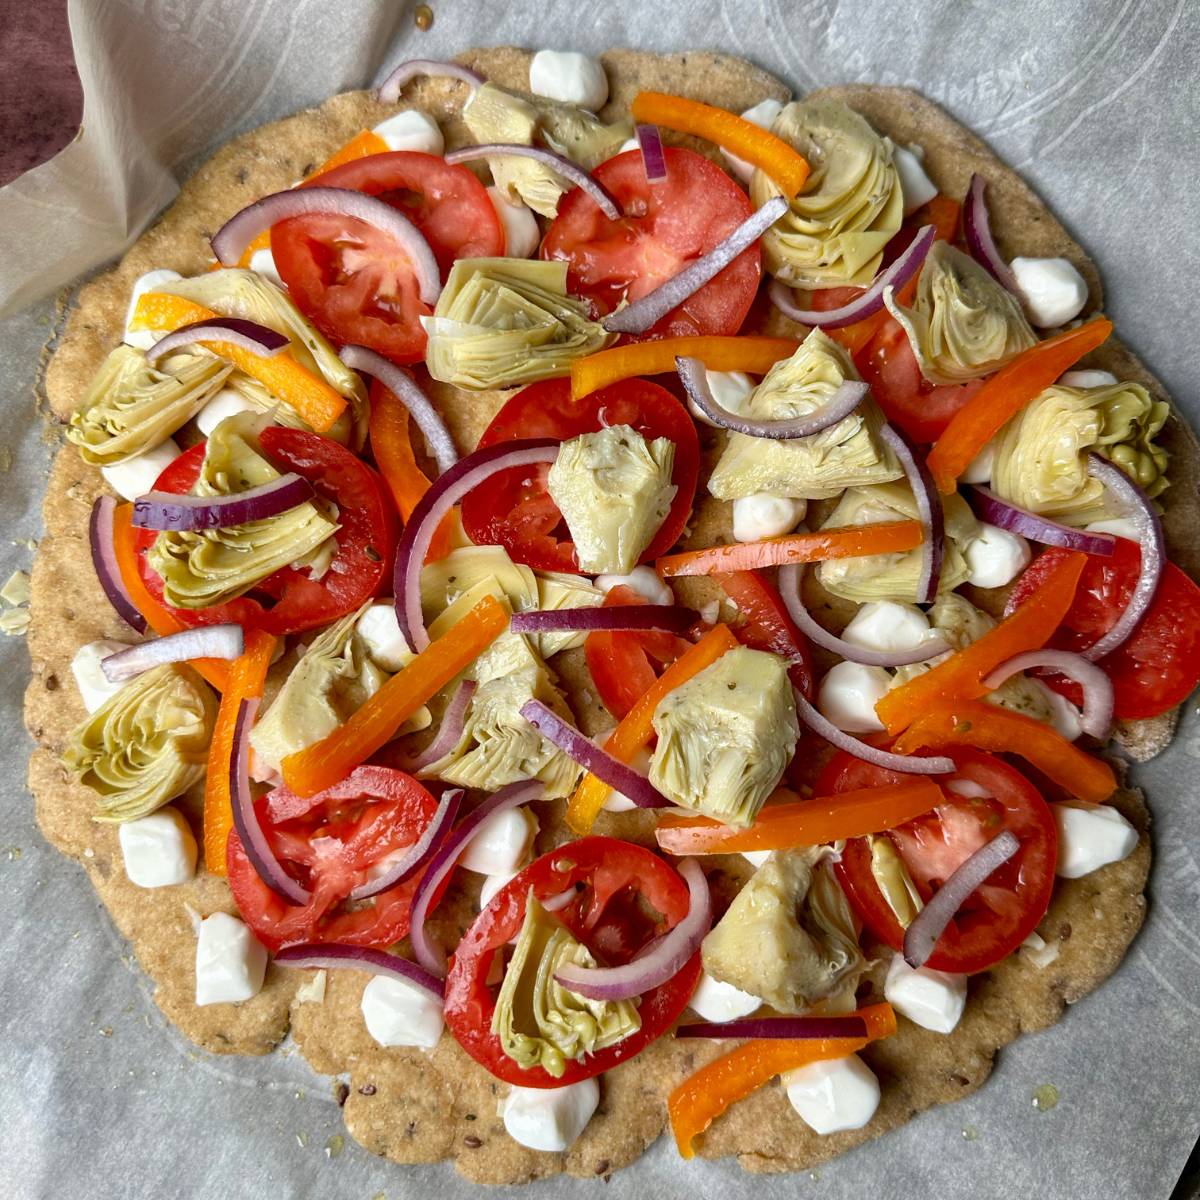 Circular pizza topped with tomato , artichokes, onion, and bell pepper.